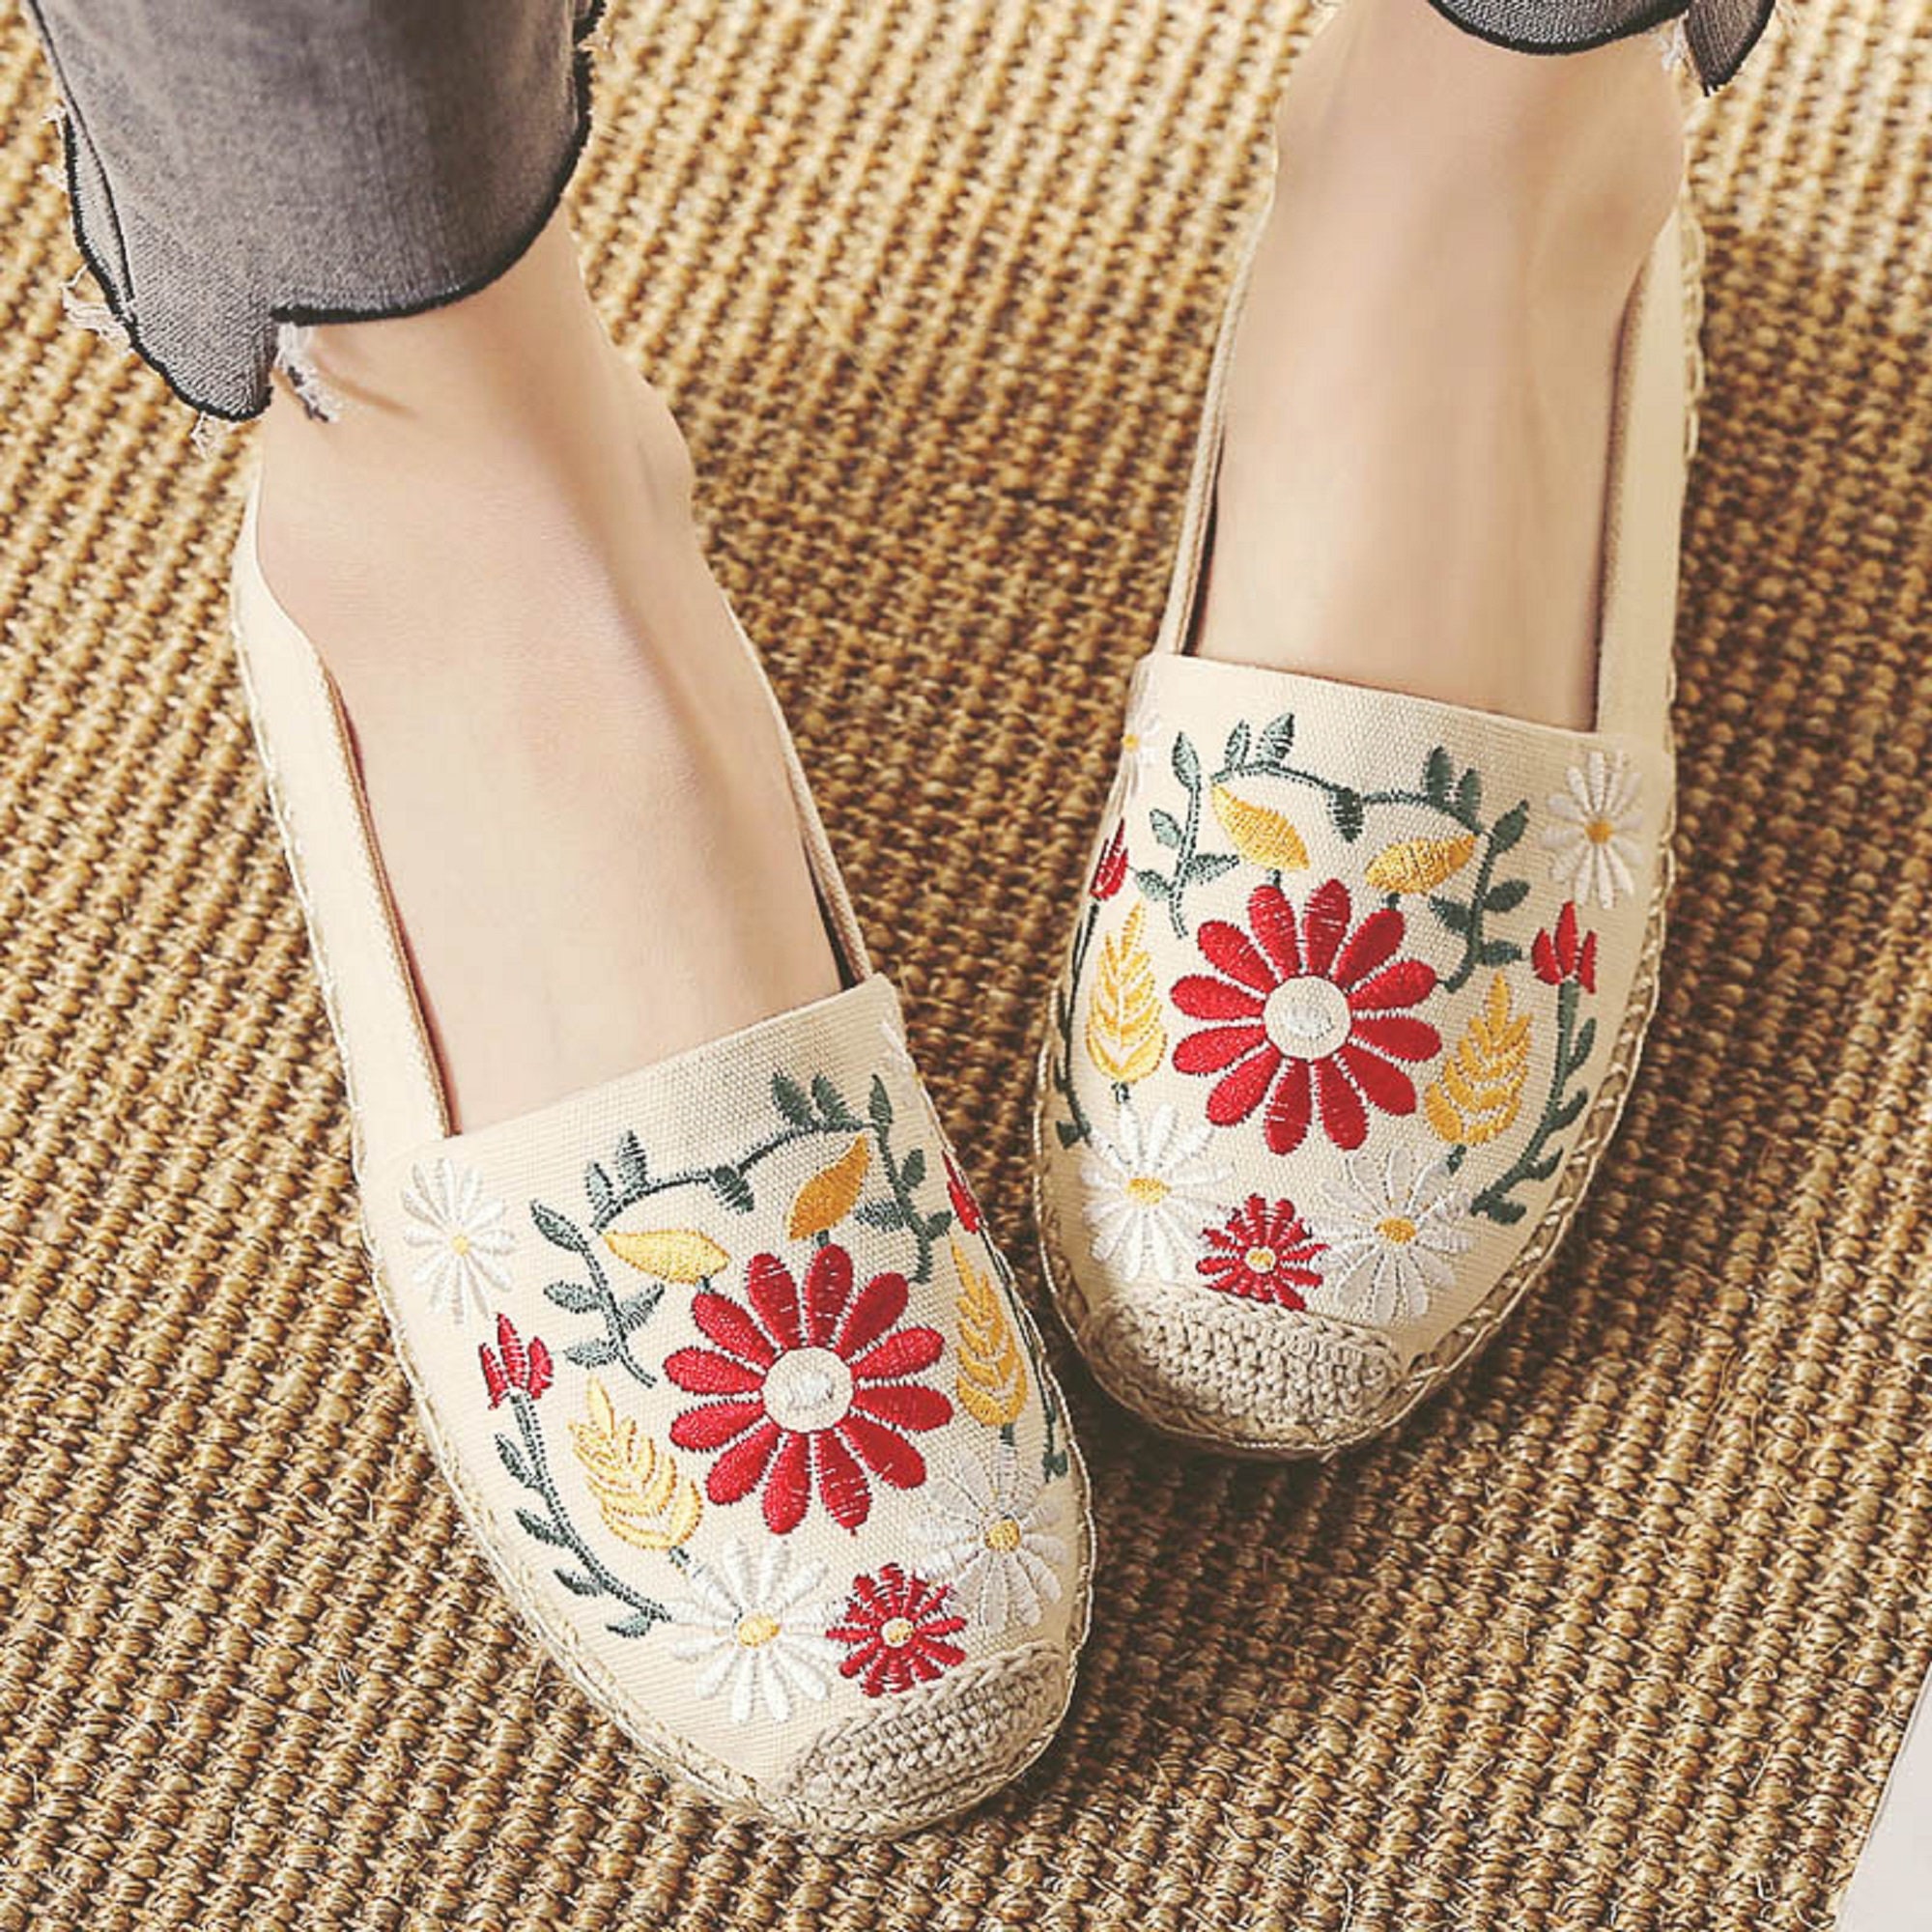 Flower Embroidered Shoes handmade Emboroidered Shoes summer - Etsy